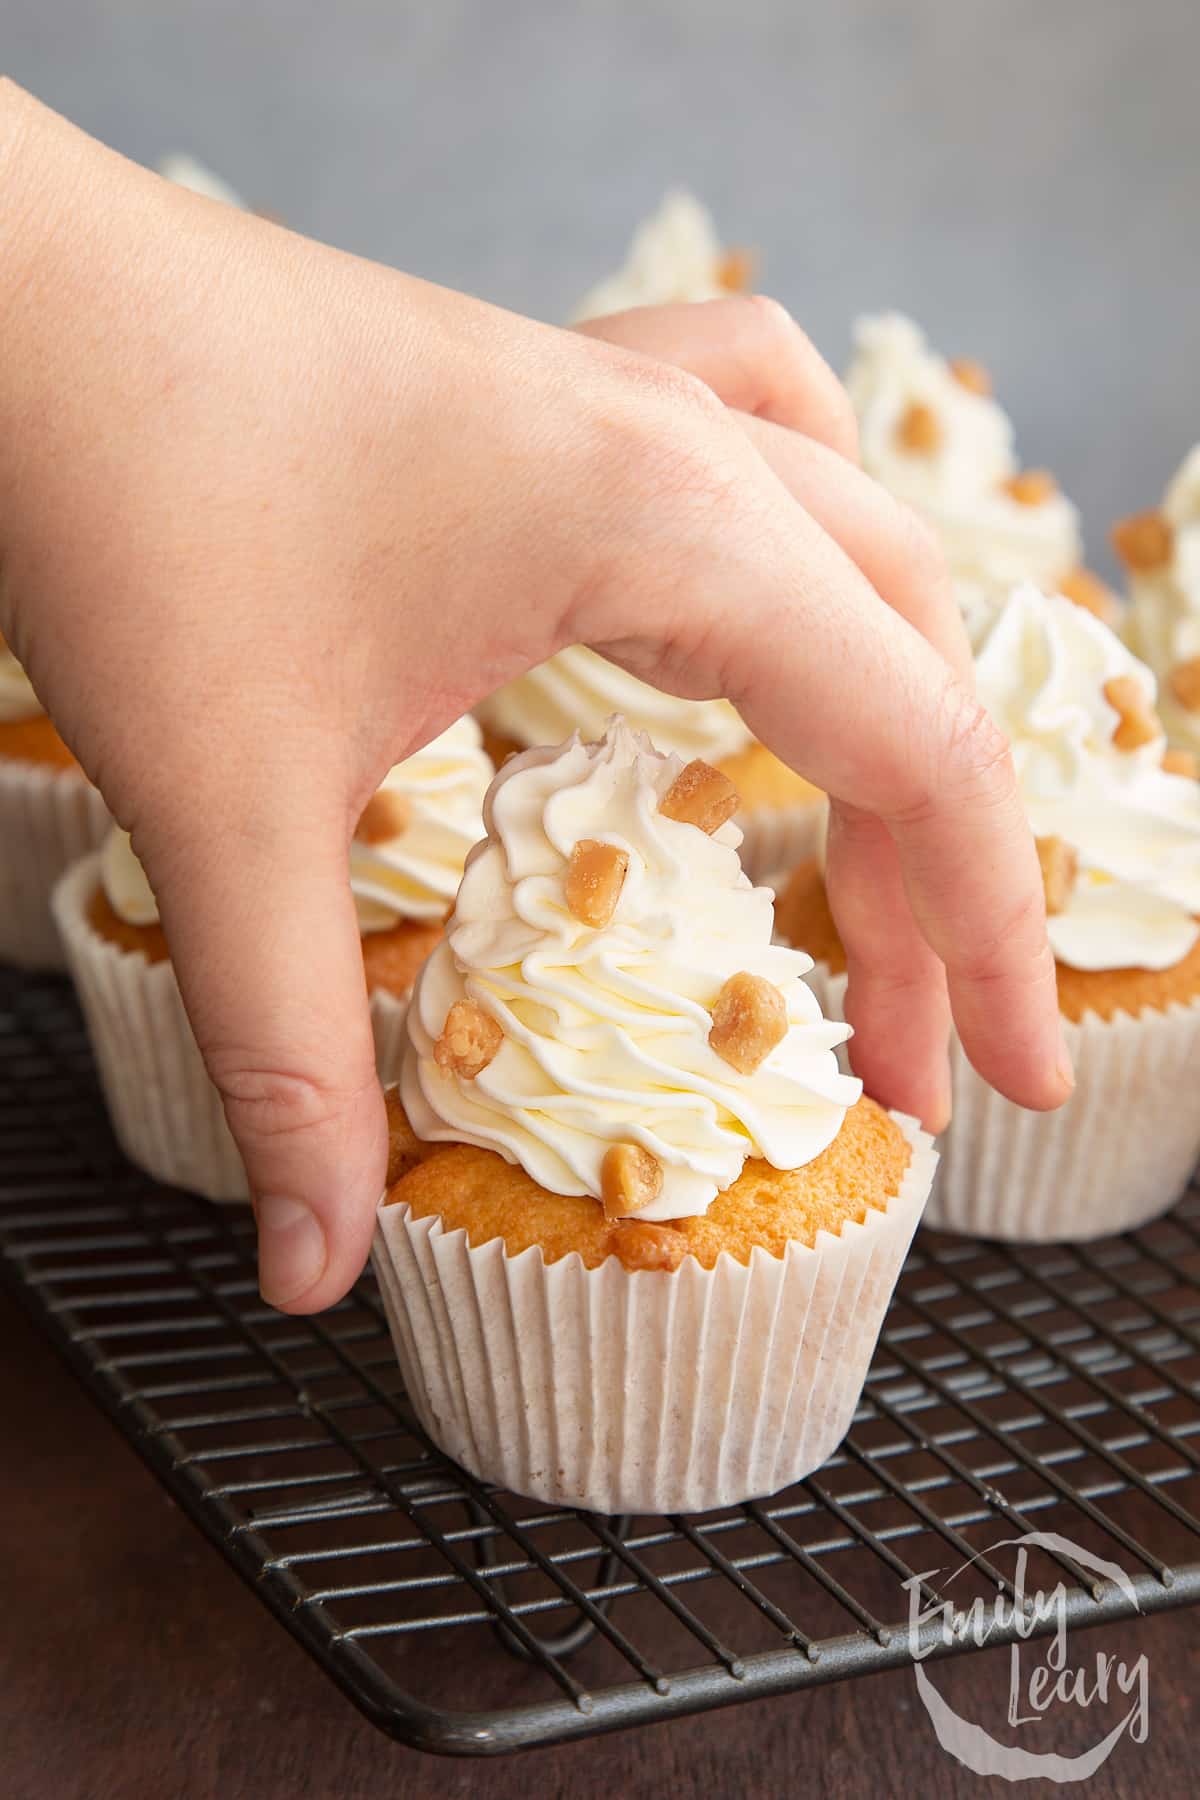 a hand picking up a vanilla fudge cupcake with vanilla buttercream and fudge chips.